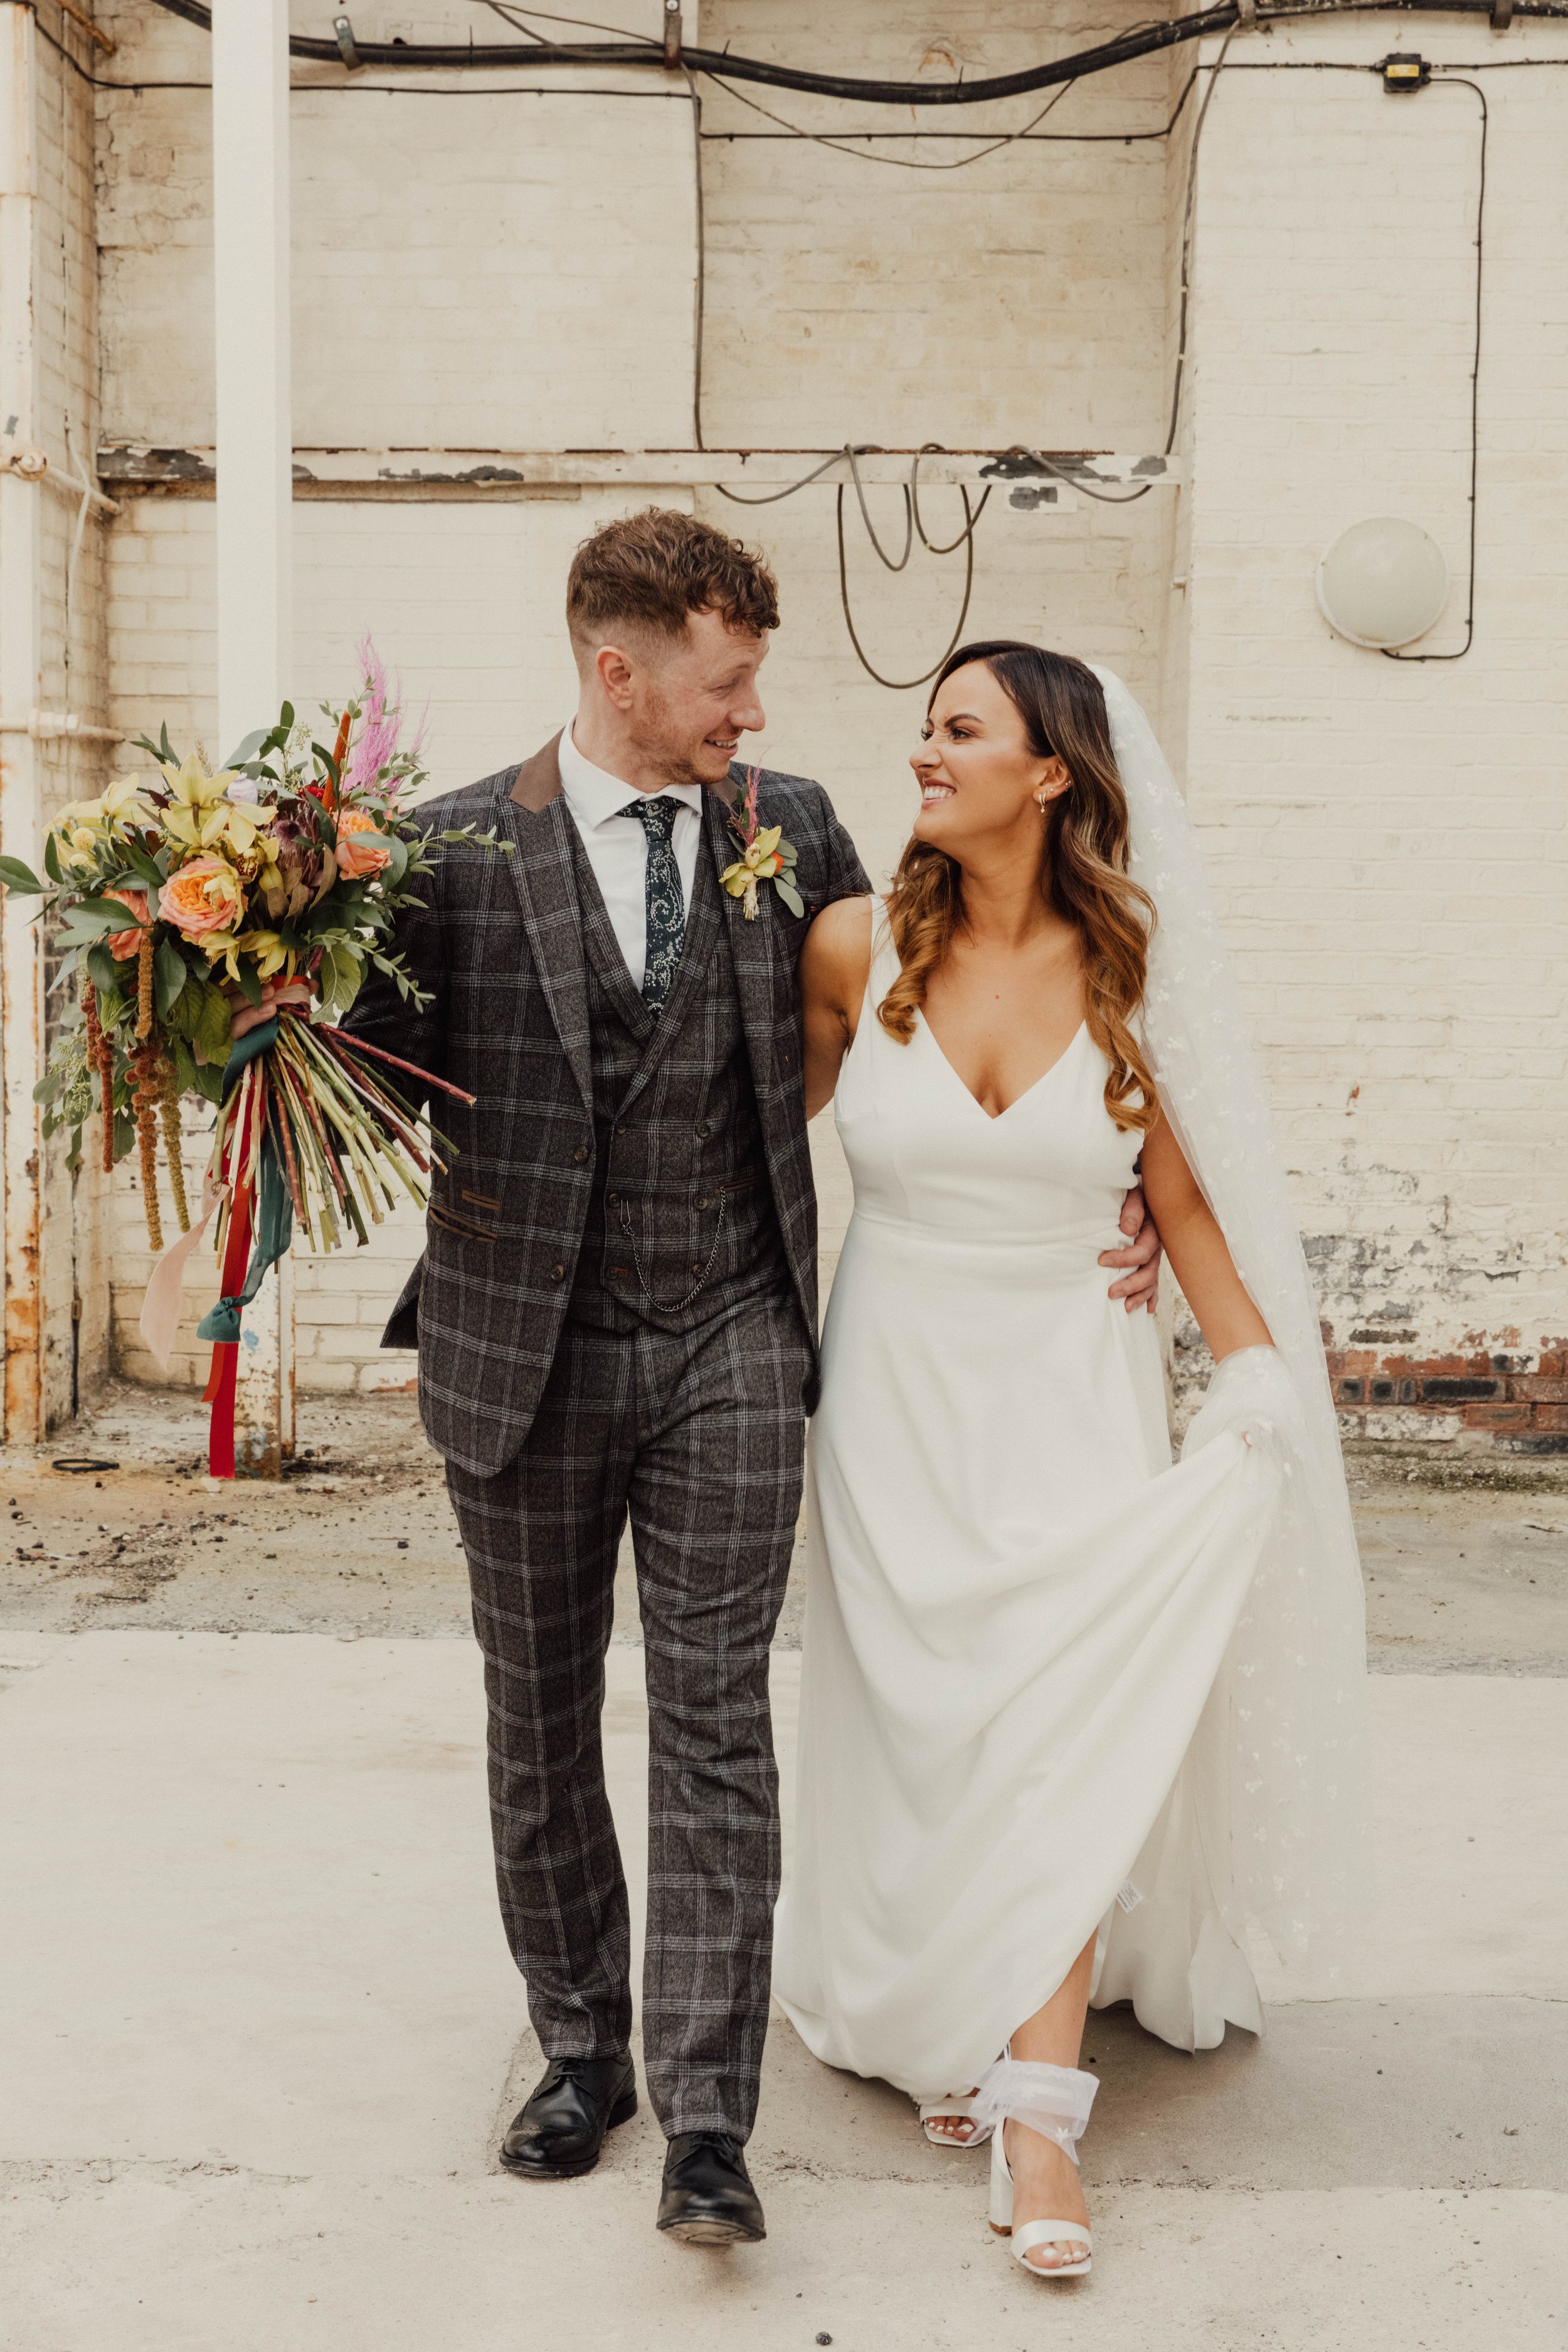  Within a white industrial style building the bride and groom are stood looking at each other with their arms around each other. The groom is wearing a tartan 3 piece suit and is holding the brides bouquet which has been created with bright real, dye